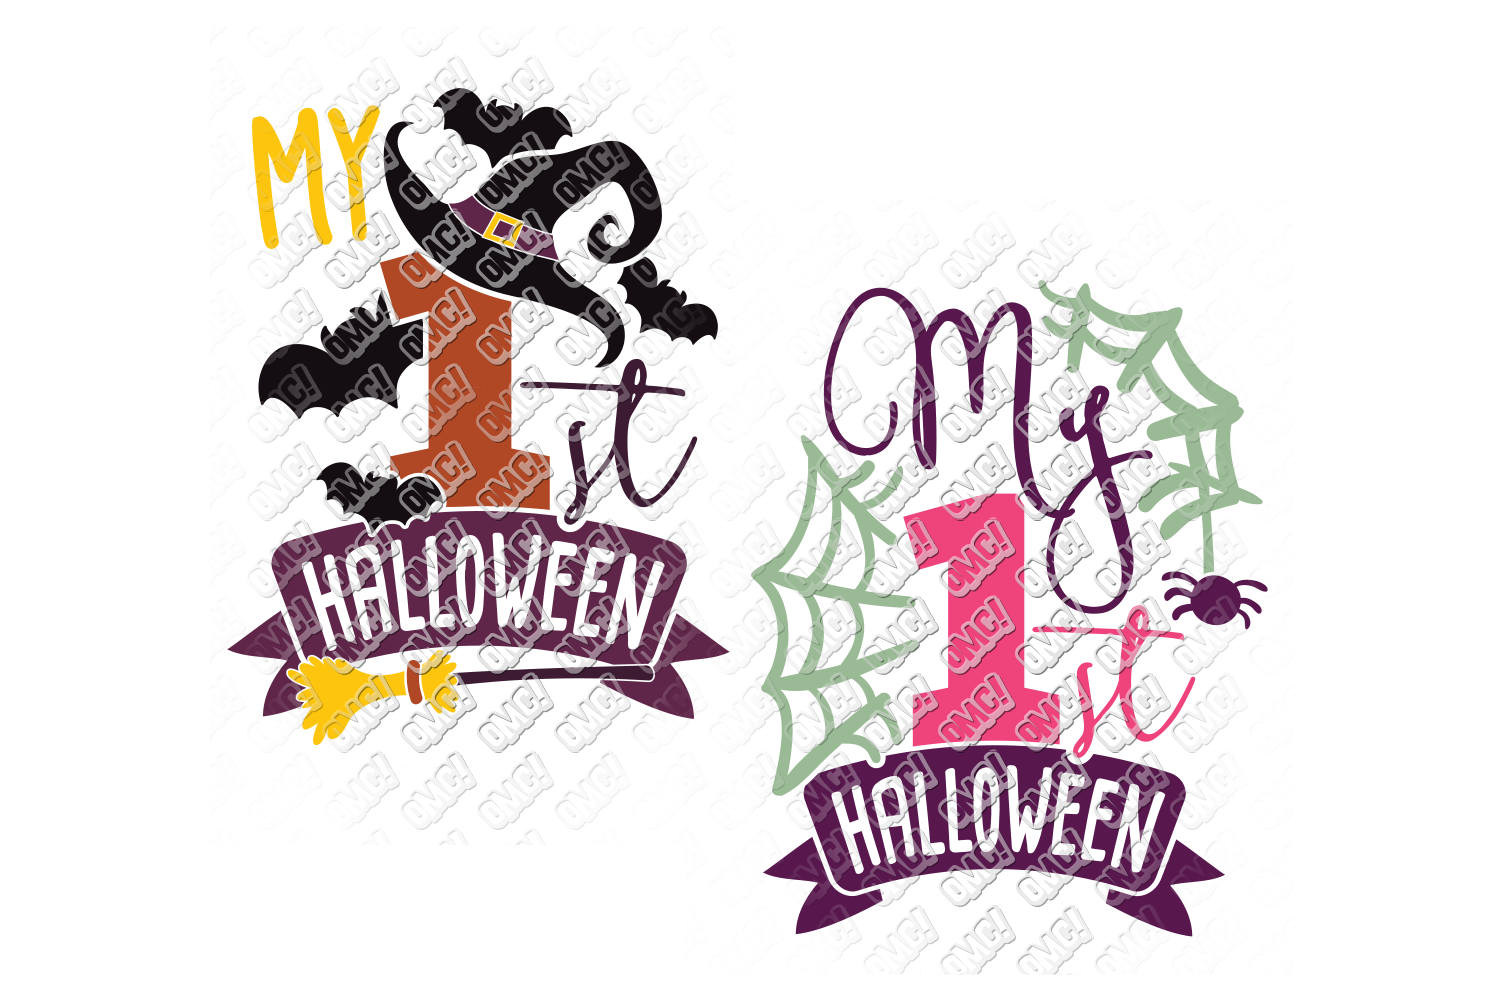 My First Halloween SVG in SVG, DXF, PNG, EPS, JPEG